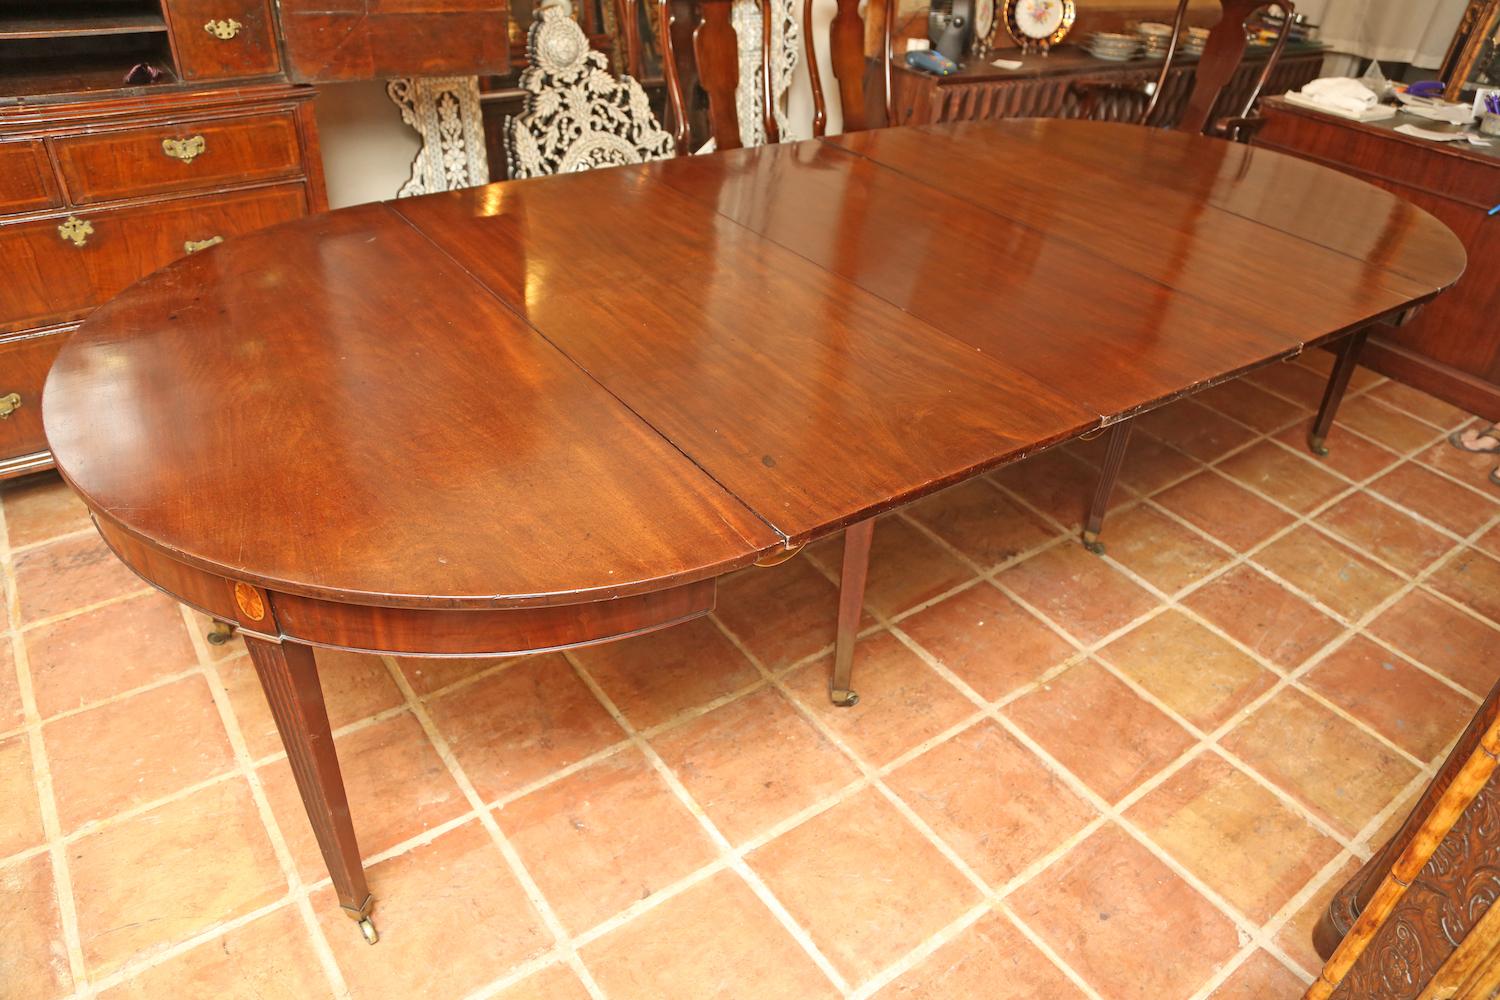 This is a superb quality solid mahogany antique English dining table with 3 leafs also having a pair of D end console tables. Very good quality very heavy with the original patina. It sits on square tapered legs with brass cup castors to the base